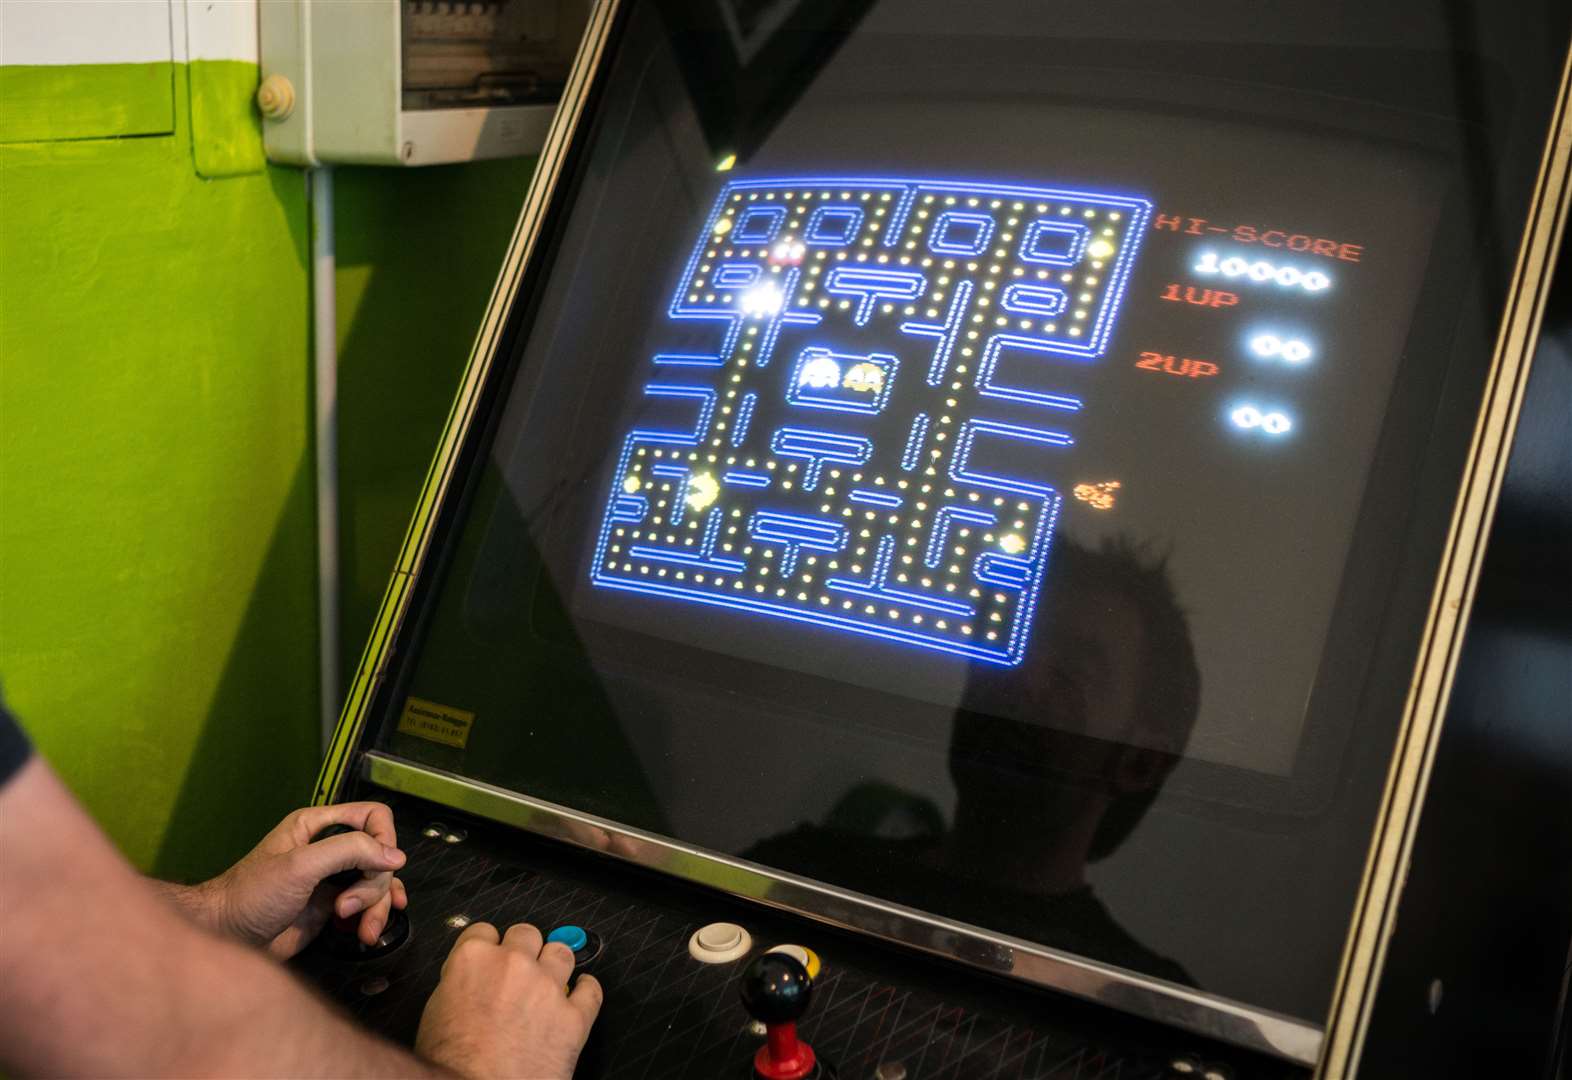 The joys of Pac-Man kept many of us entertained during the 1980s